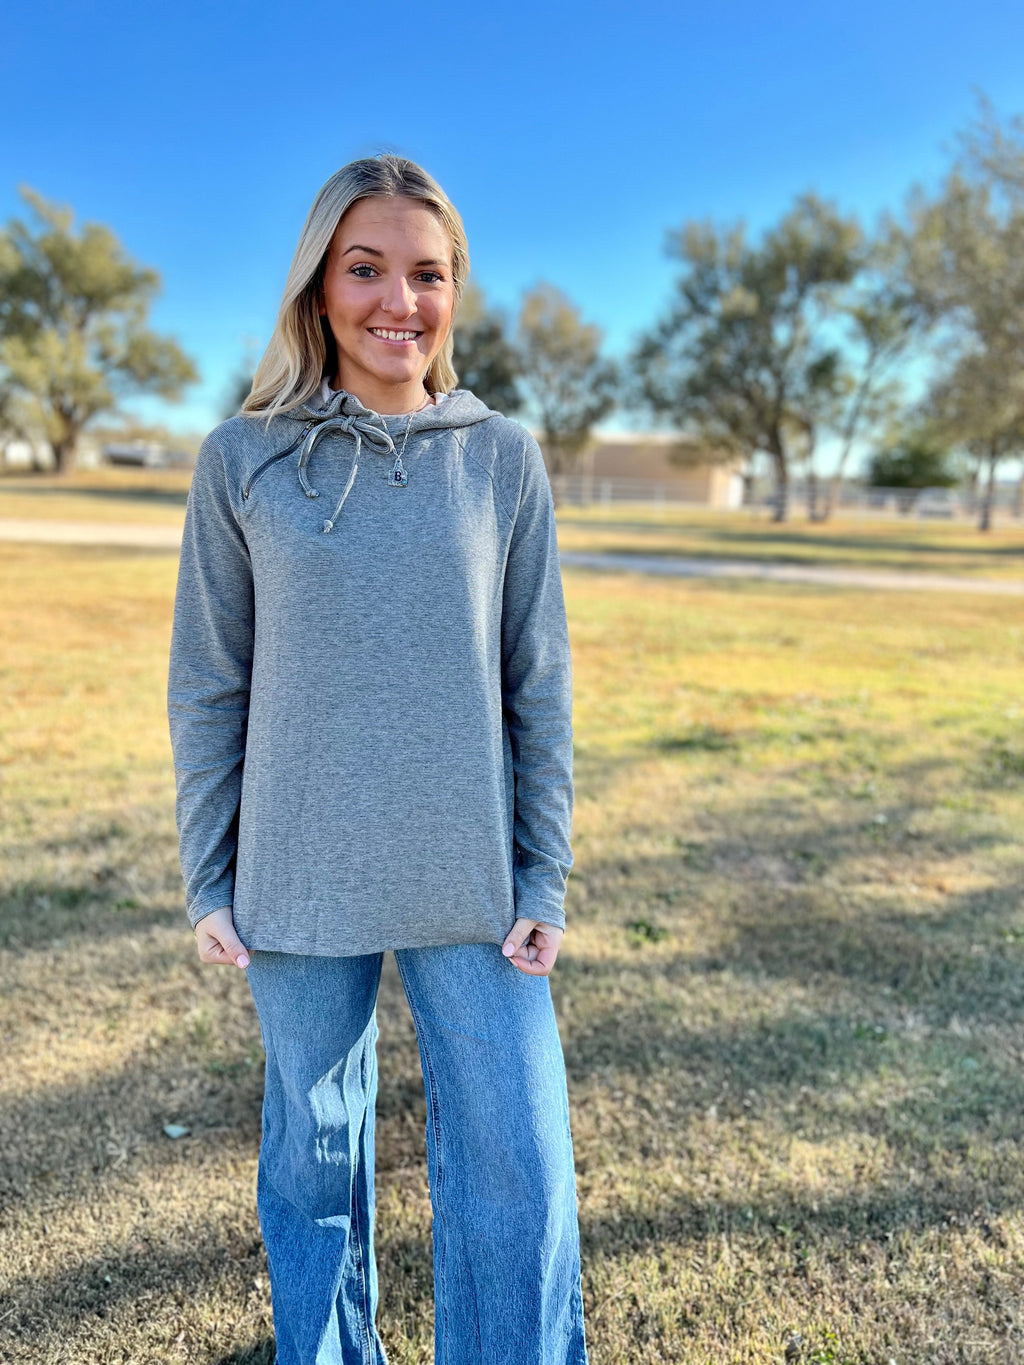 Take your style to new heights with this On Cloud 9 Pullover! It's grey striped, hooded and raglan, and features a unique zipper detail for a modern look. Knit from a cozy blend of Polyester, Rayon and Spandex, you'll stay comfy and look cool in this long sleeve top. Soar to the top of the fashion world!